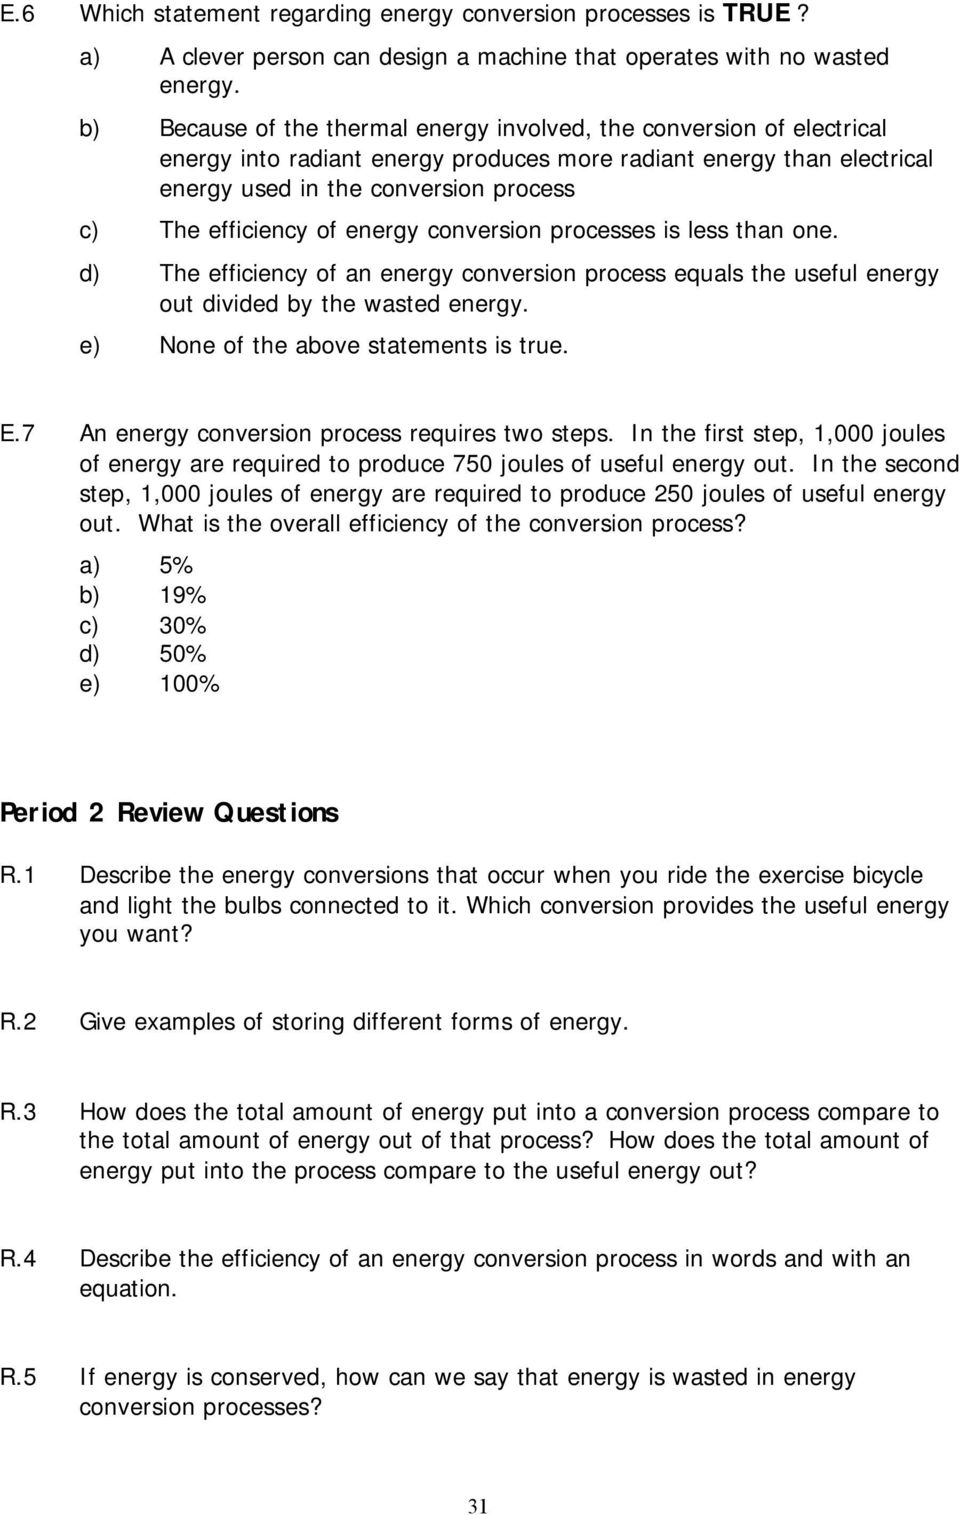 of energy conversion processes is less than one. d) The efficiency of an energy conversion process equals the useful energy out divided by the wasted energy. e) None of the above statements is true.